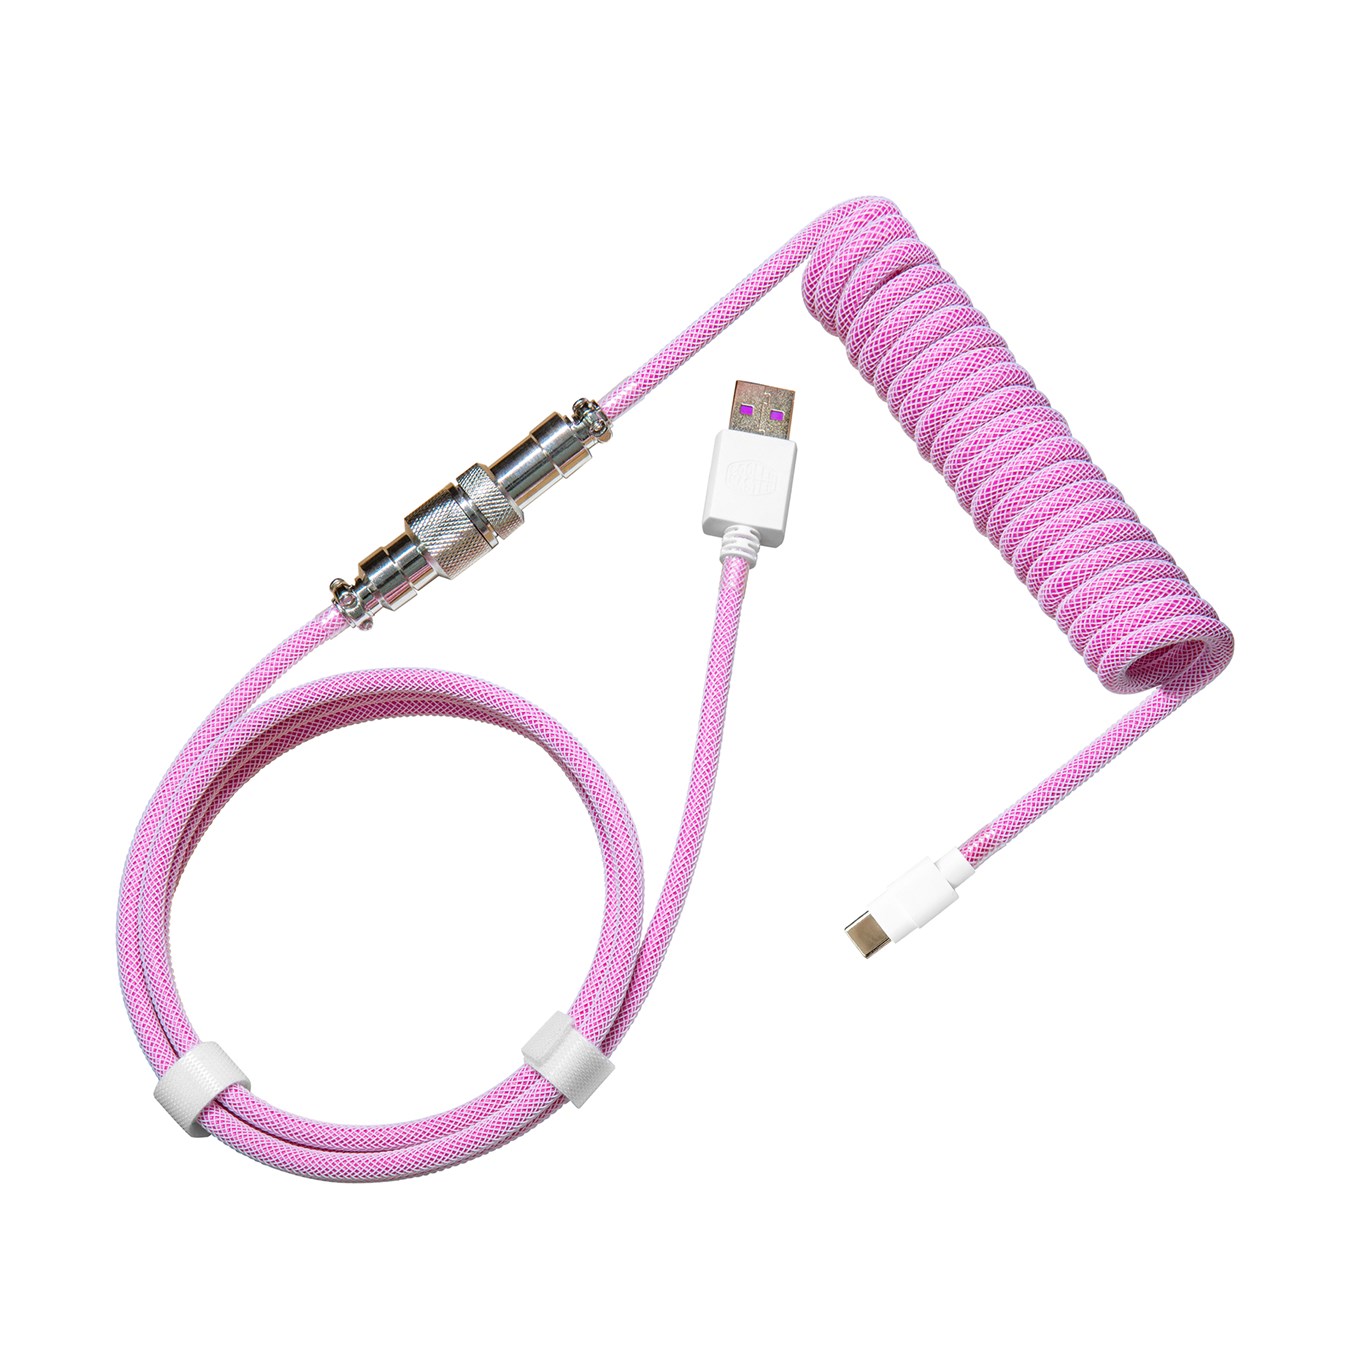 Coiled Keyboard Cable - Magenta - USB Type-A to USB Type-C connector